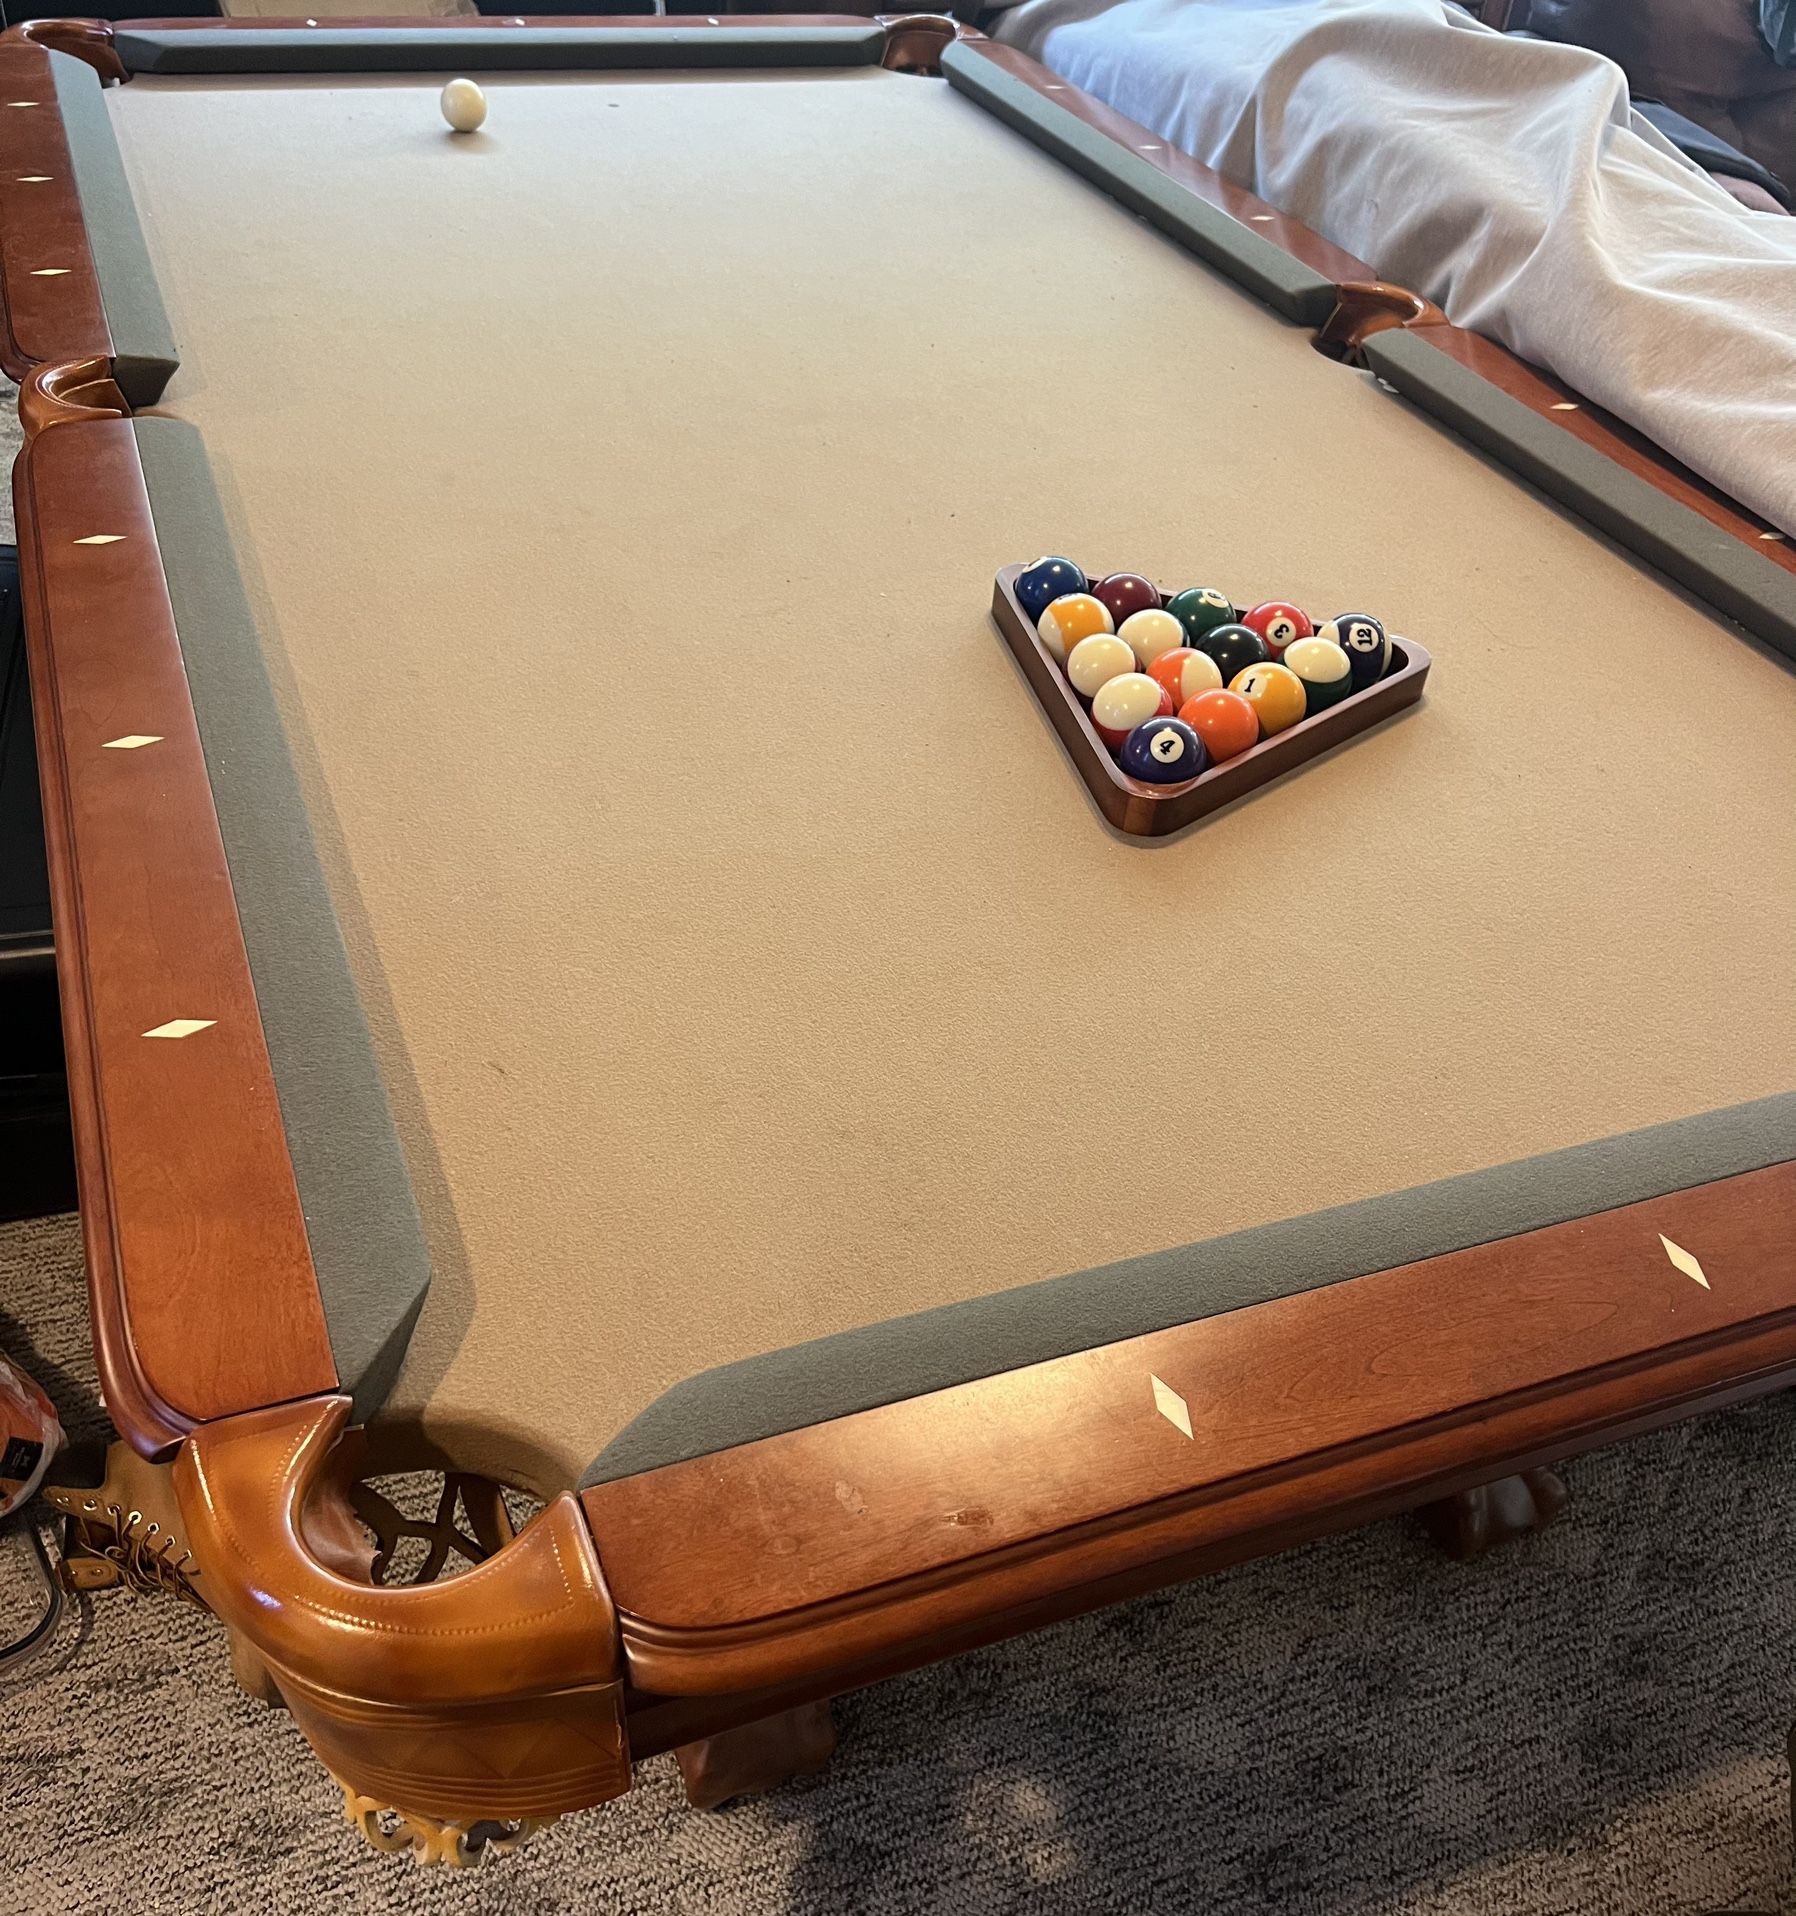 Pool Table For Sale 